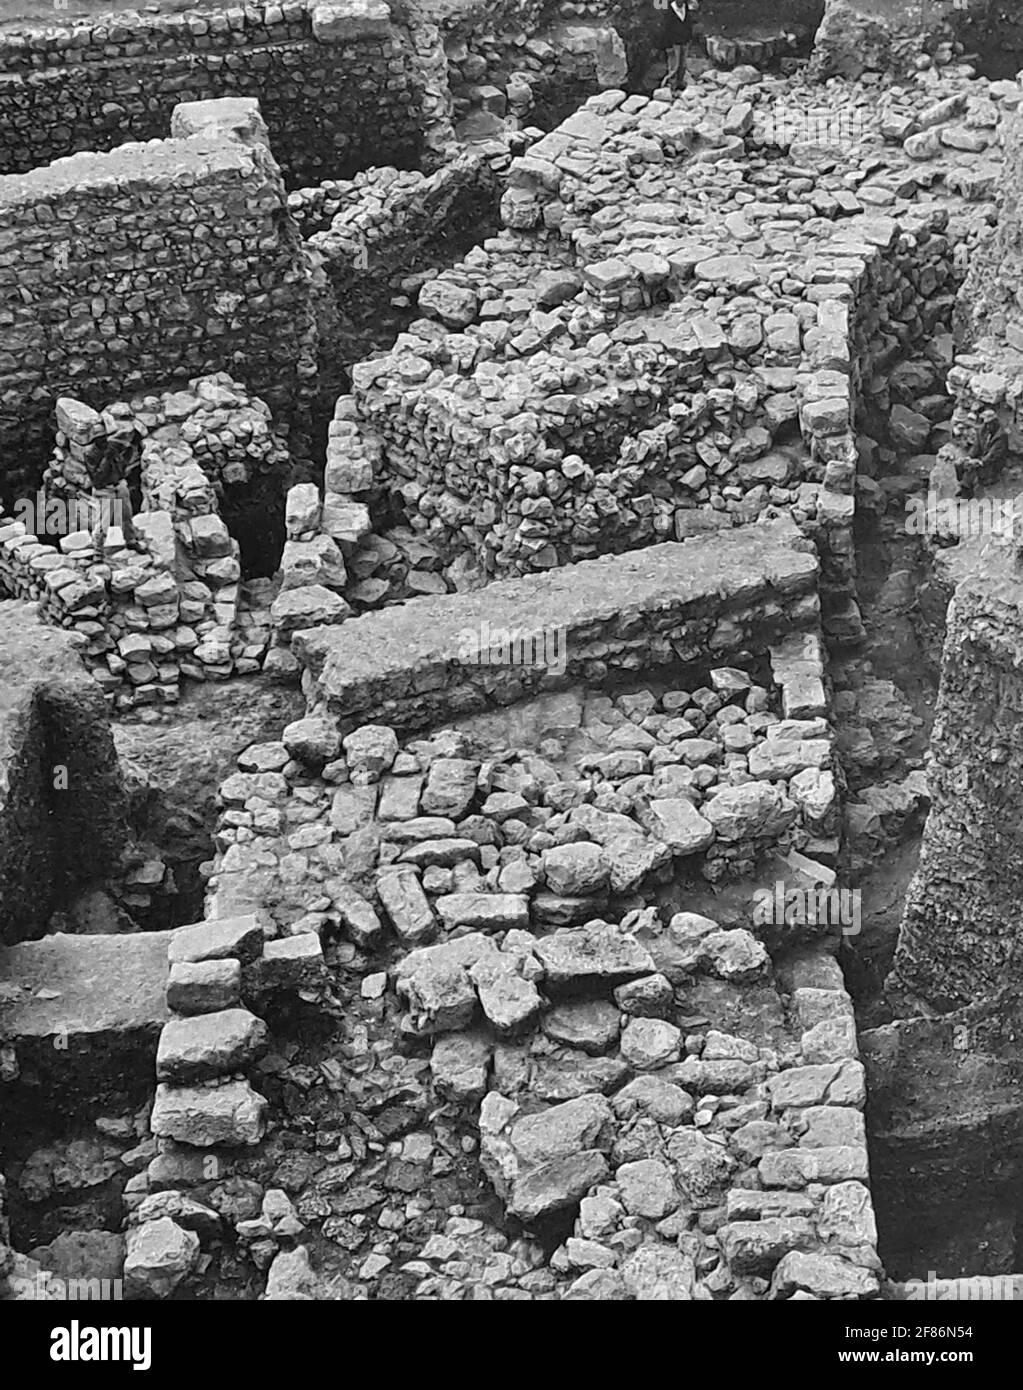 167. PART OF THE WALL ENCLOSING JERUSALEM BUILT IN THE 8TH C. B.C. BY KING HEZEKIAH TO PROTECT THE CITY FROM THE INVADING ASSYRIANS. EARLY STAGES OF E Stock Photo